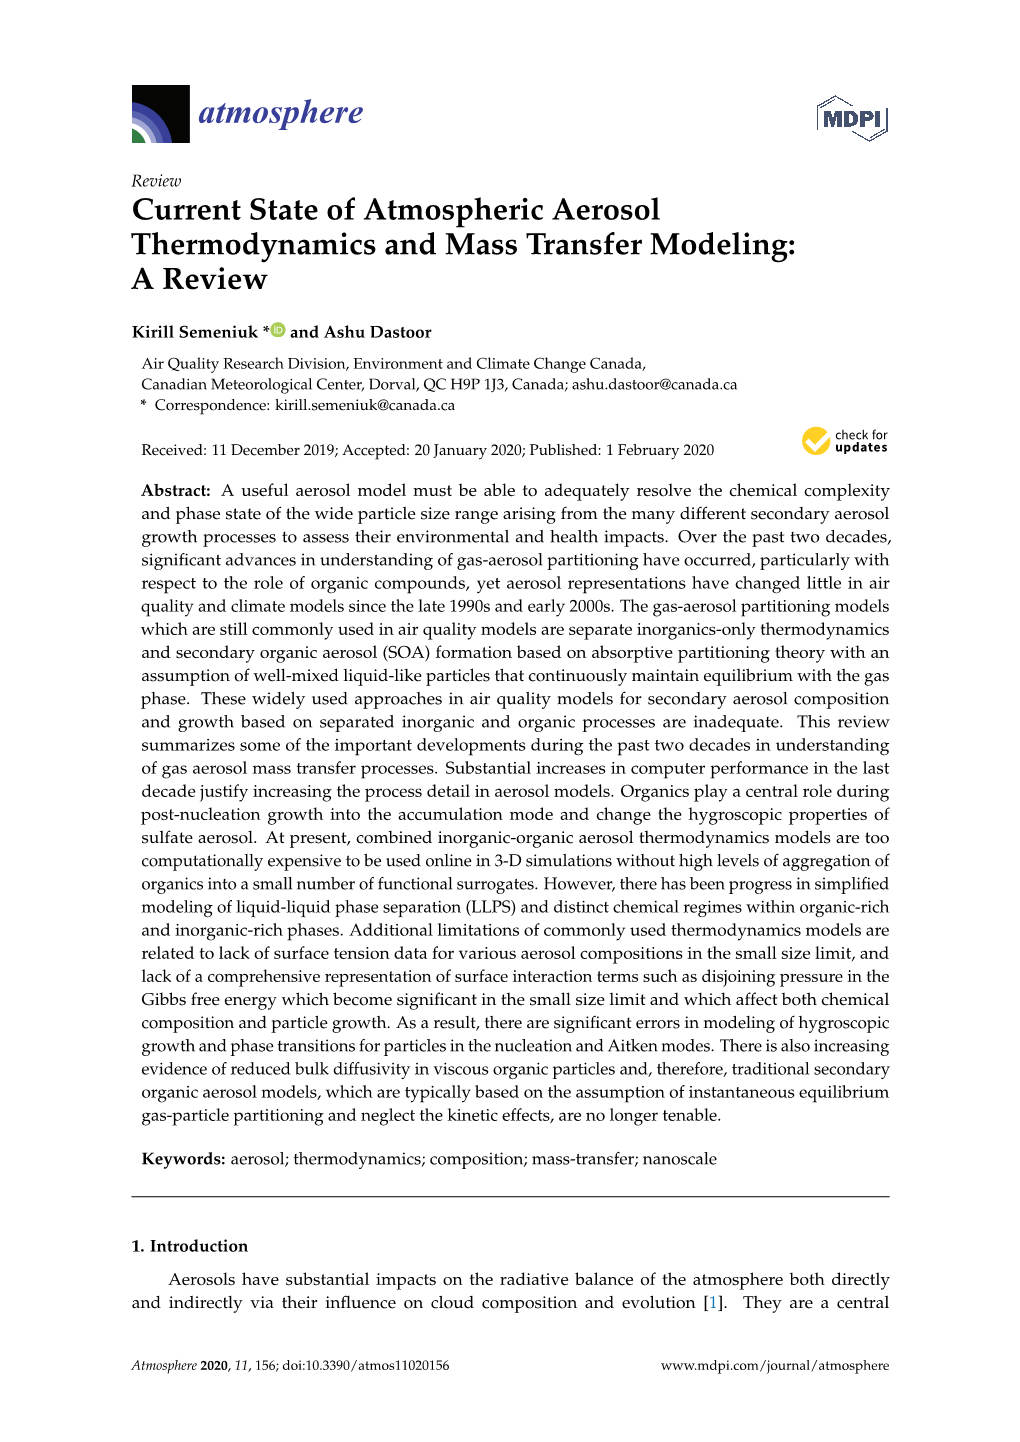 Current State of Atmospheric Aerosol Thermodynamics and Mass Transfer Modeling: a Review